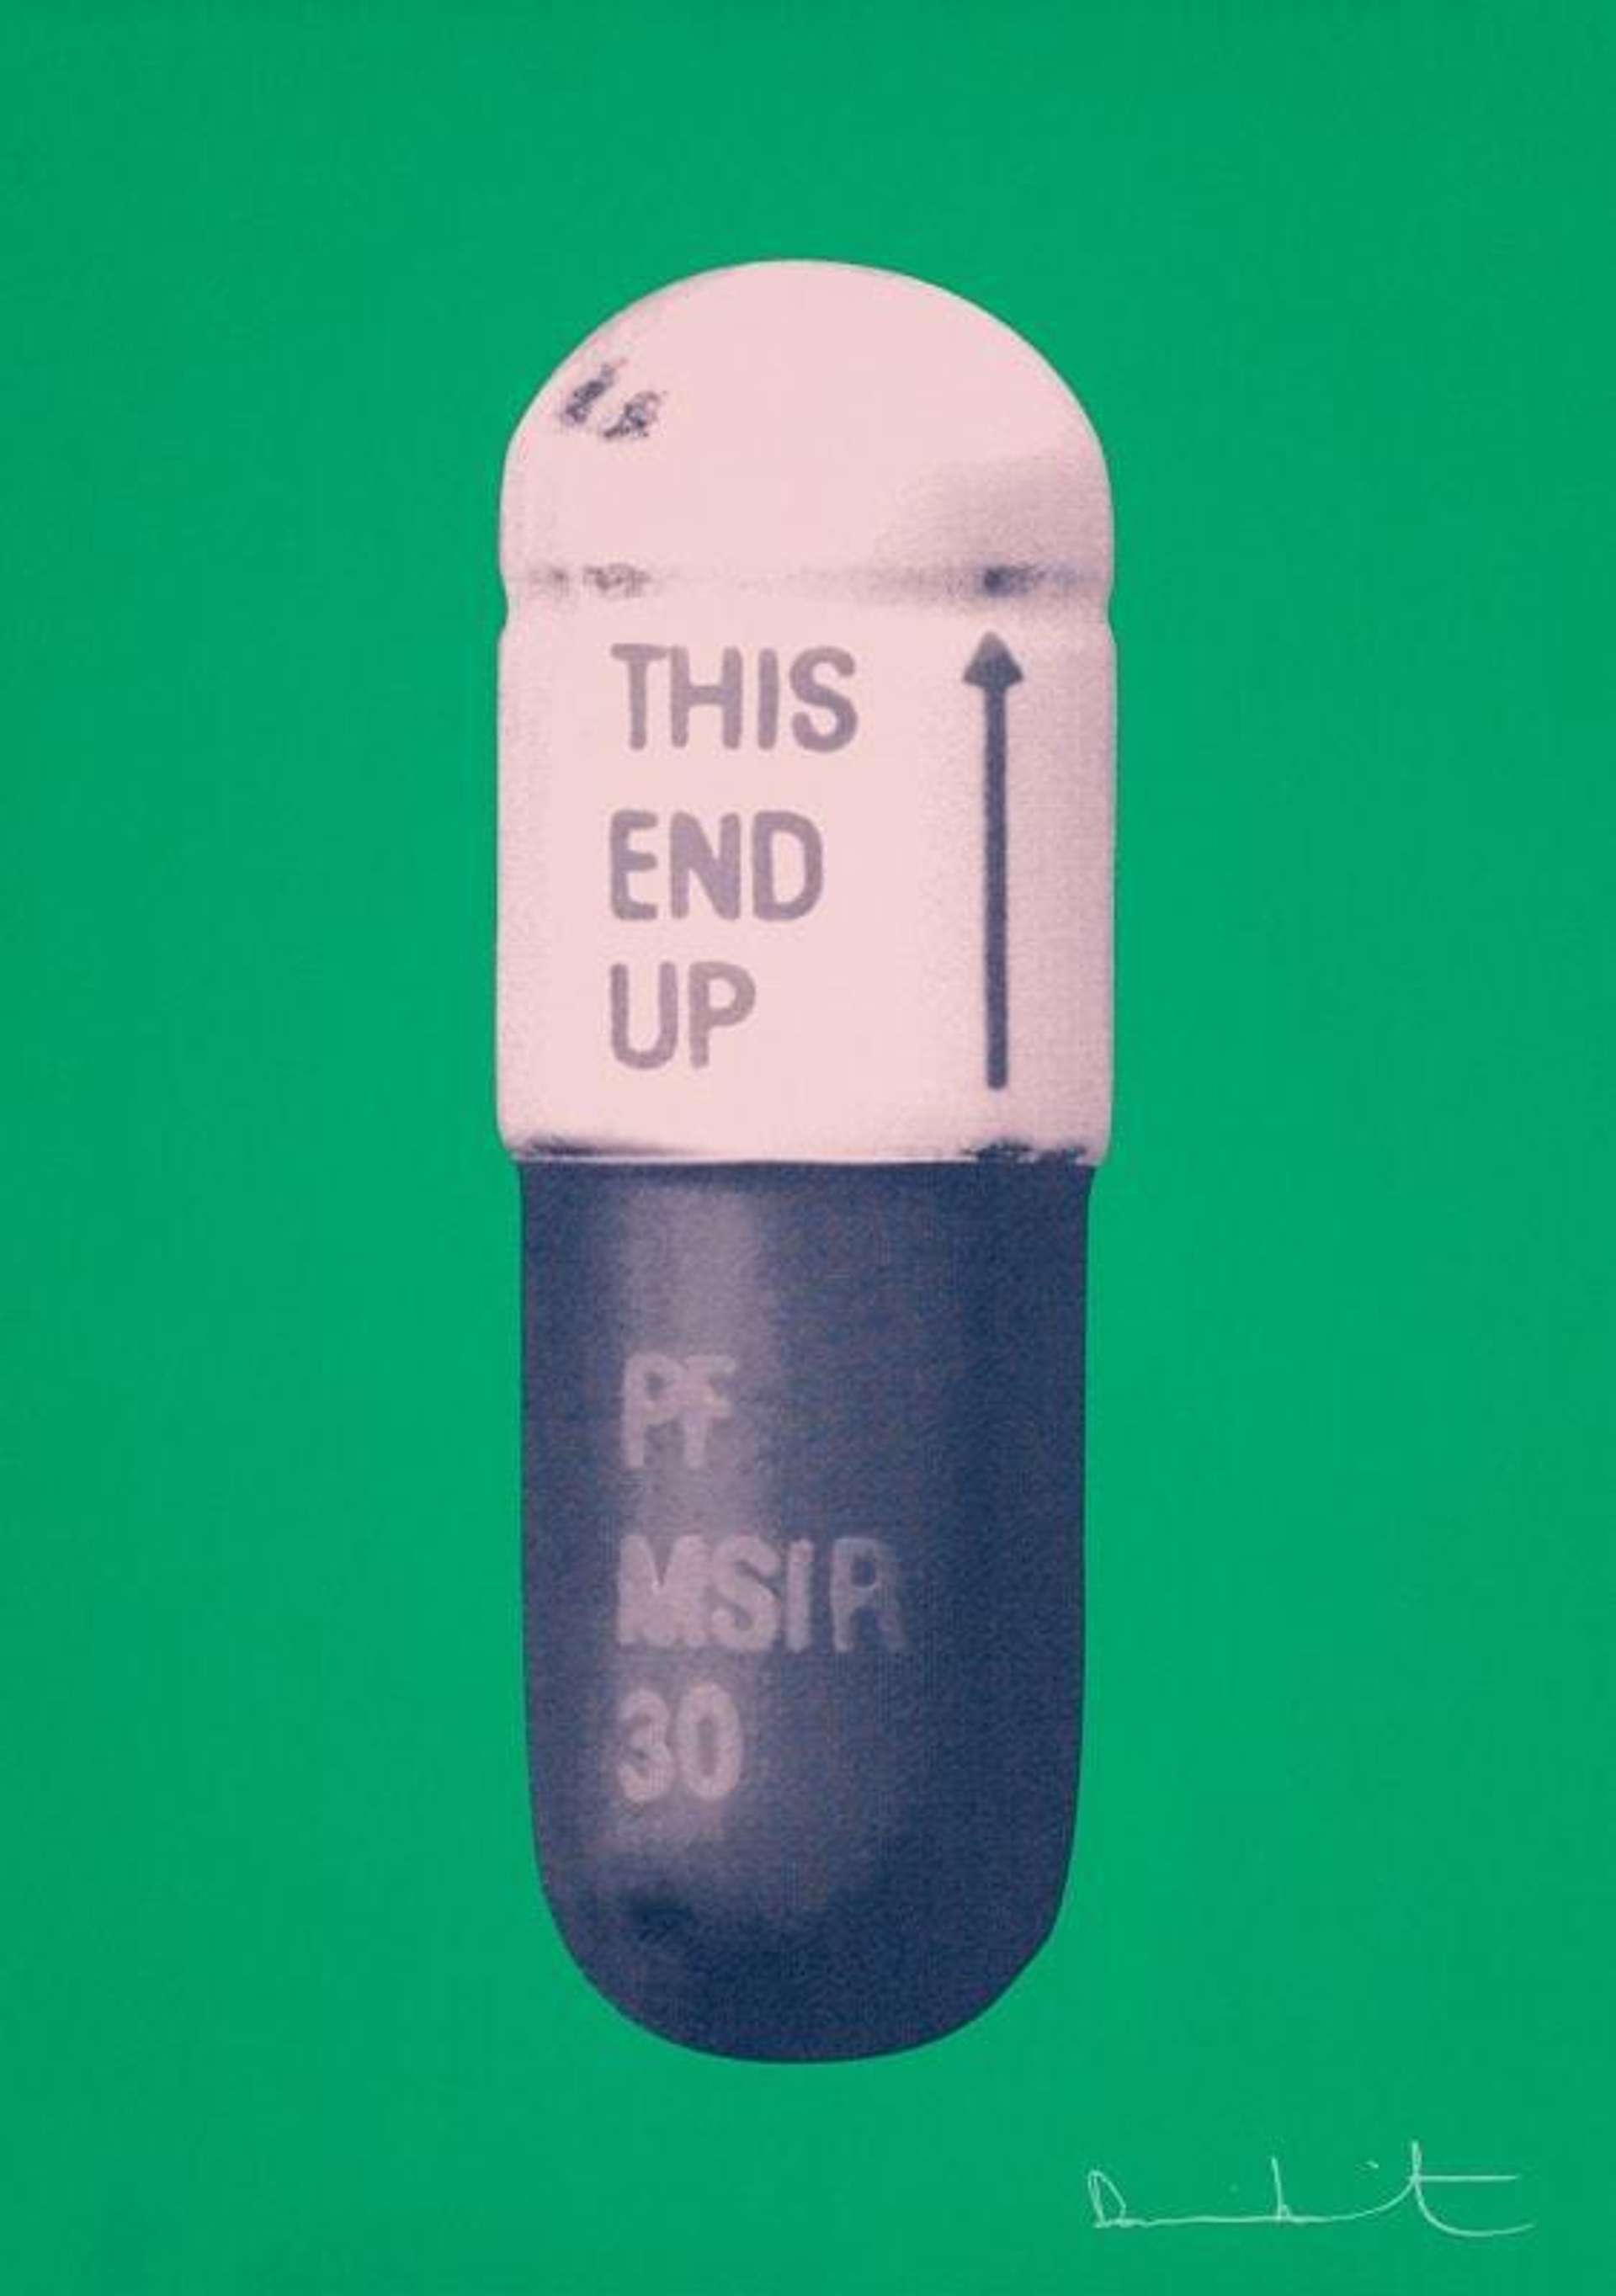 An image of the print The Cure by artist Damien Hirst. It shows a large pill, reading "This Way Up", depicted in white and purple against a green background.